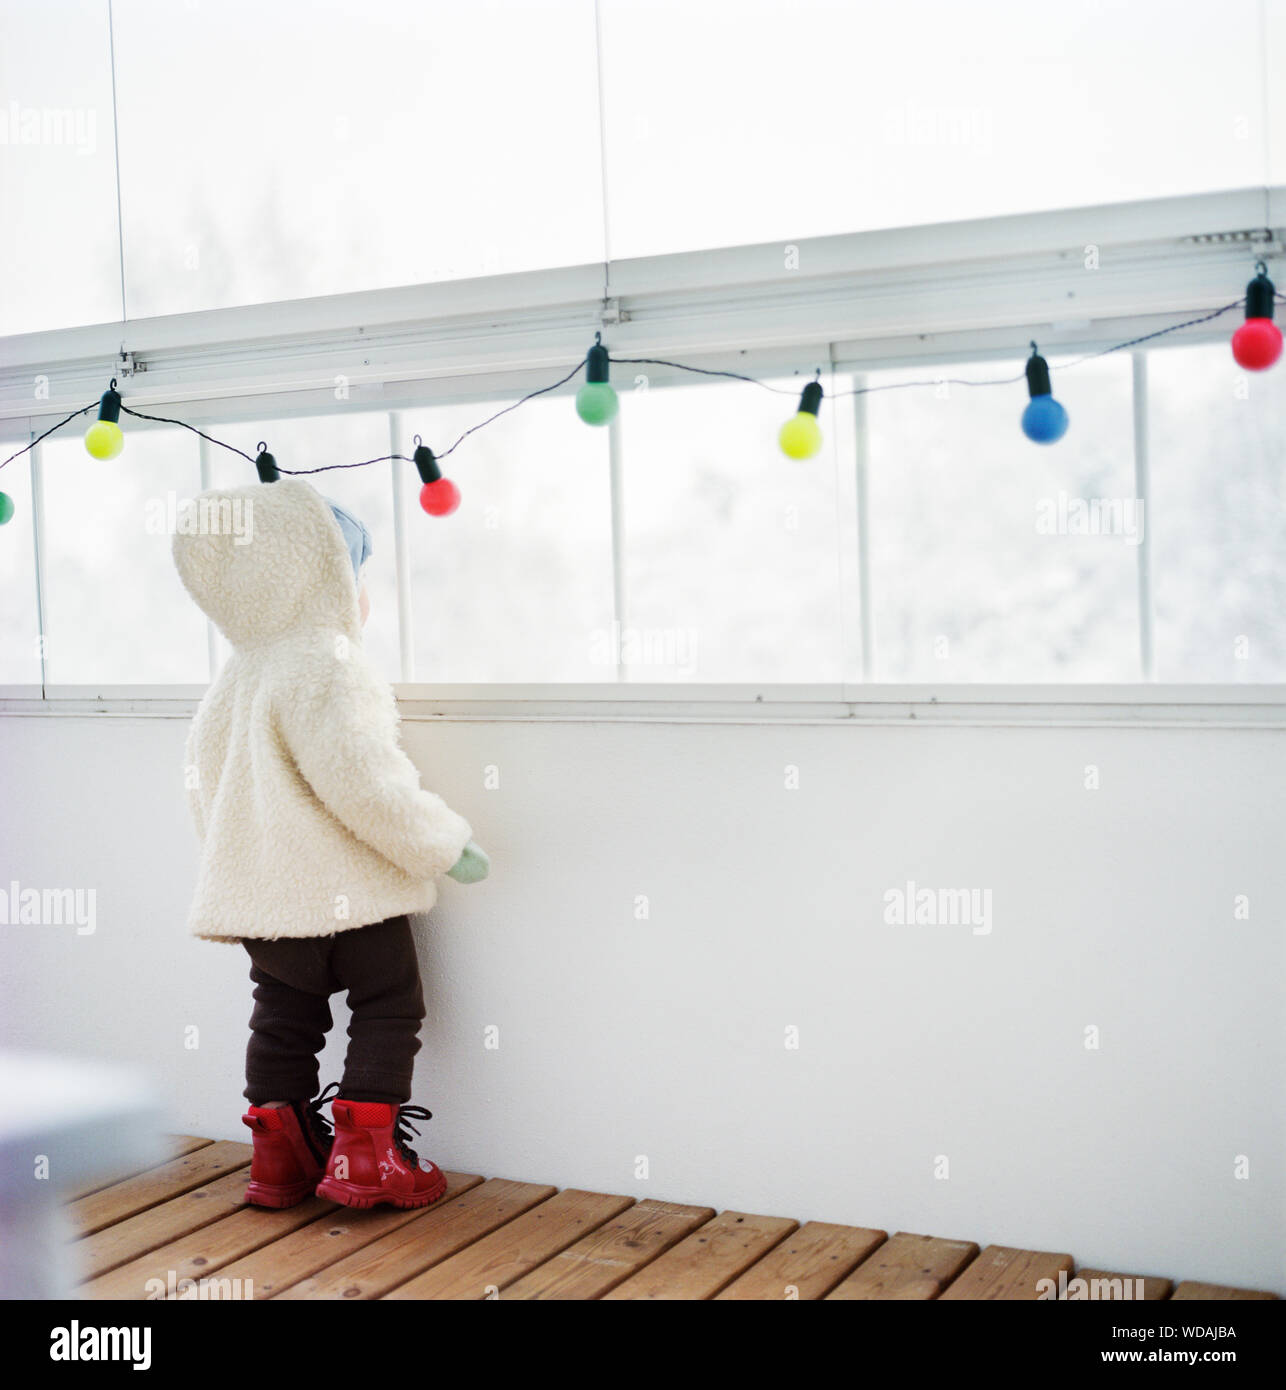 Rear view of child wearing warm clothes and looking out window Stock Photo